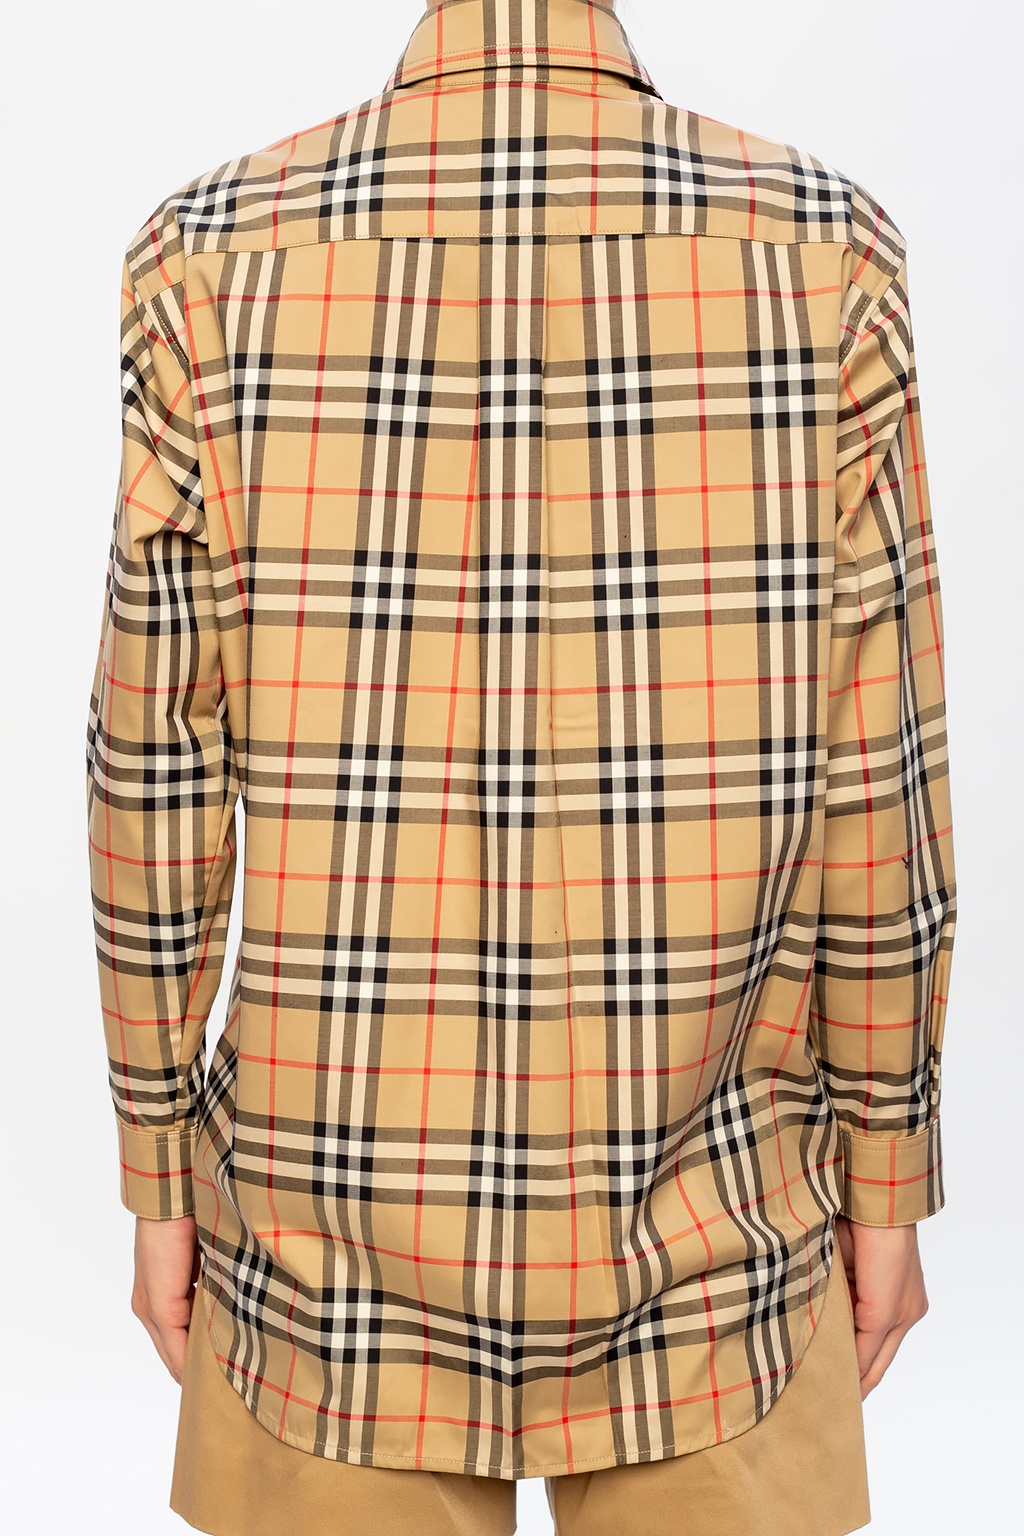 Guide to legit checking Burberry shirts from resell sites like Mercari,  Depop, Grailed, Poshmark, and others. : r/Burberry